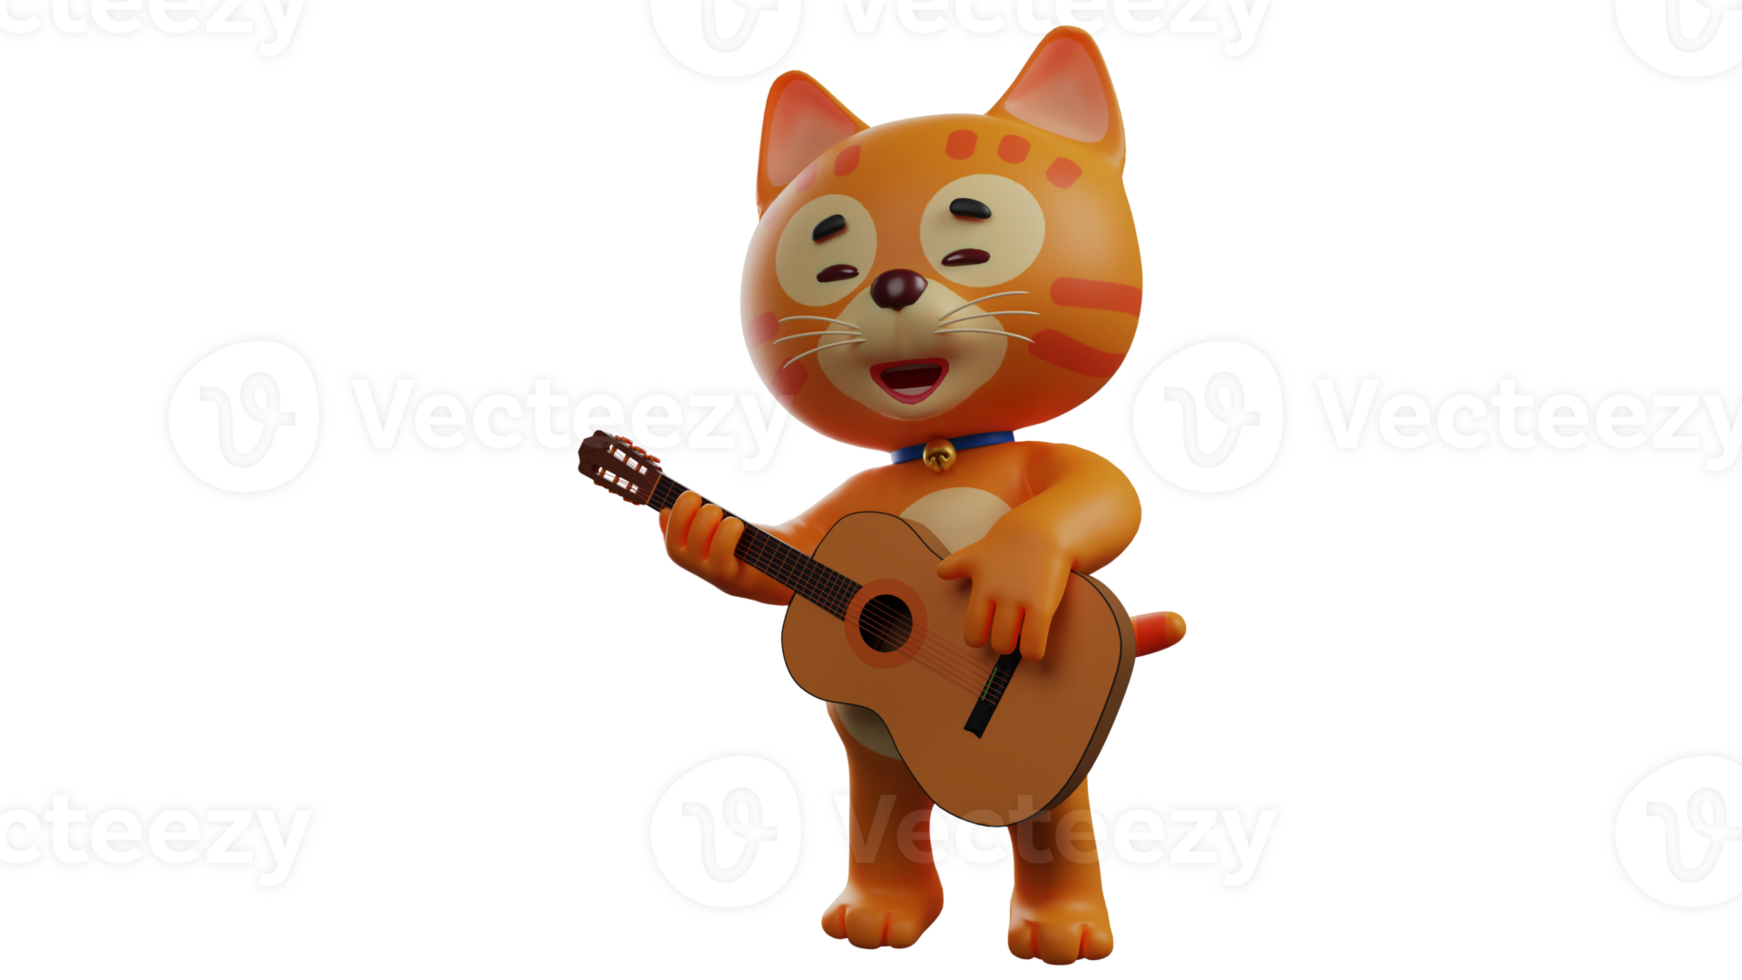 3D illustration. Talented Cat 3D Cartoon Character. Orange cat plays a guitar. An orange cat who is an expert at playing music and looks happy with his hobby. 3D cartoon character png